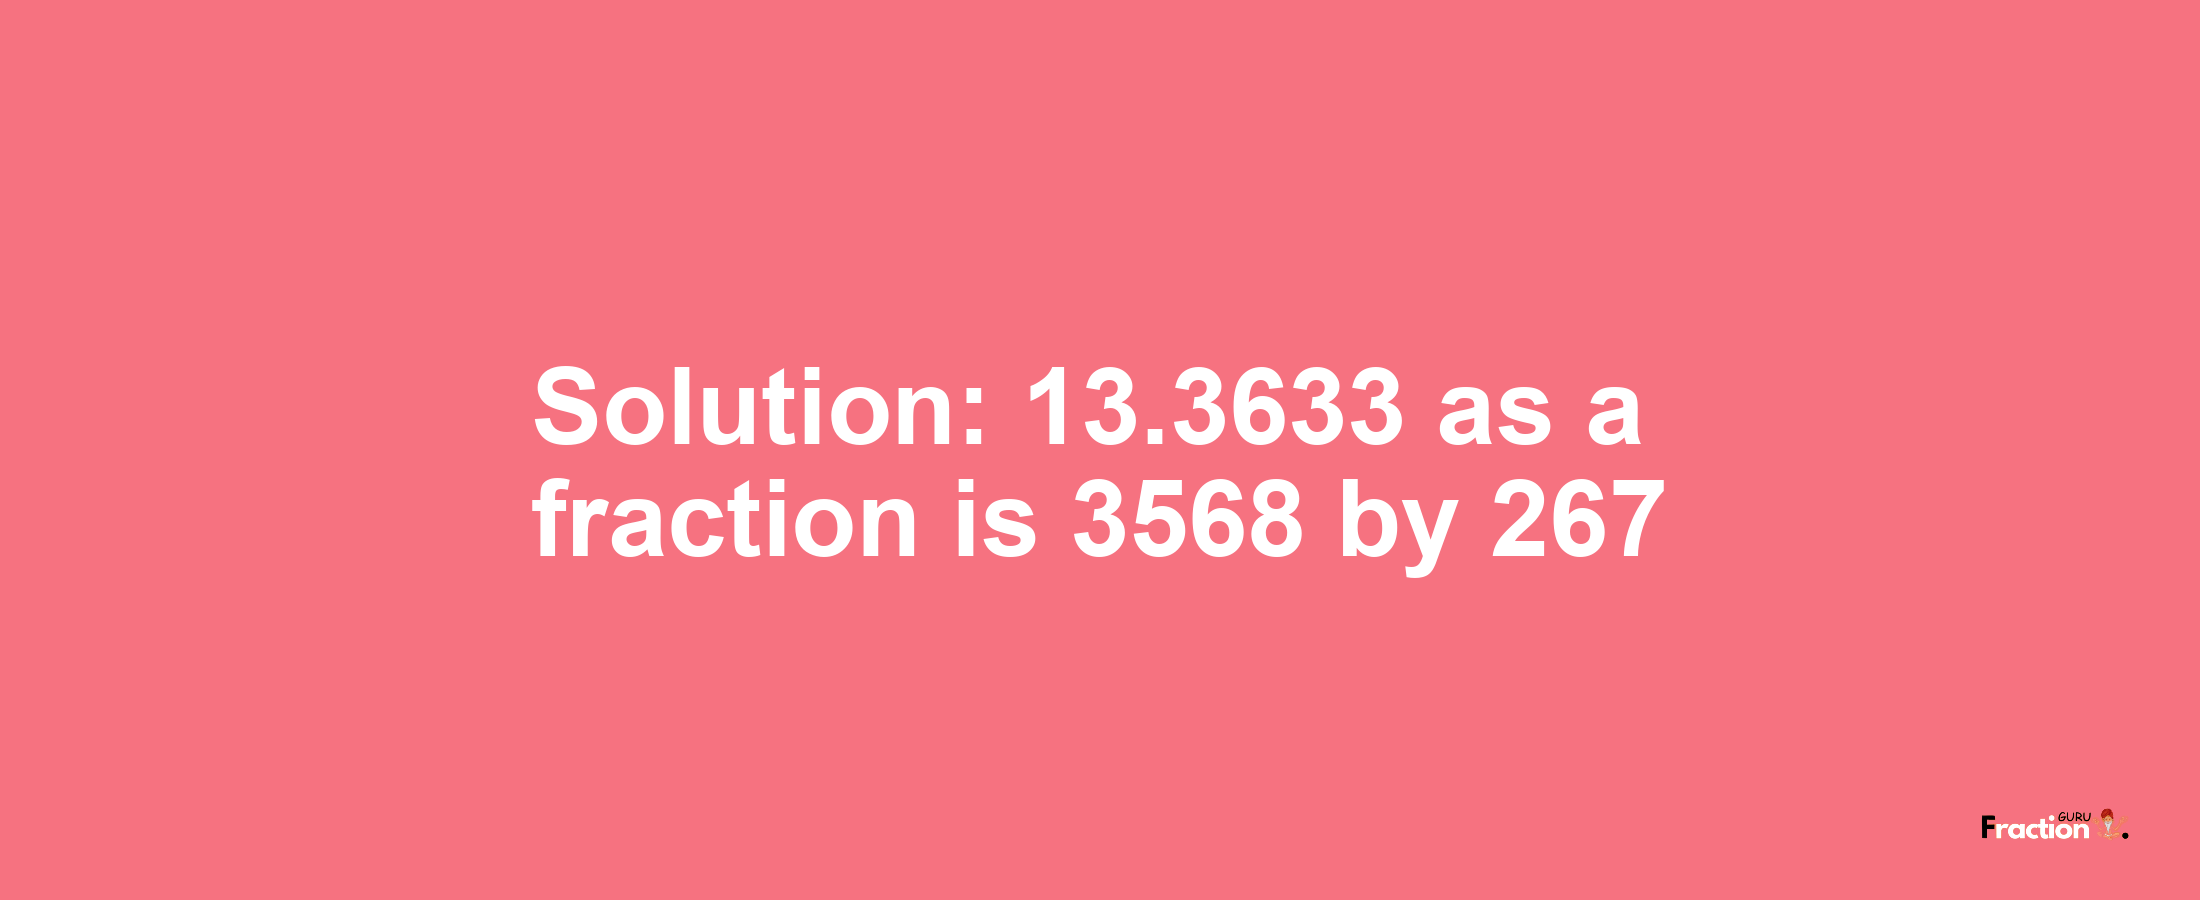 Solution:13.3633 as a fraction is 3568/267